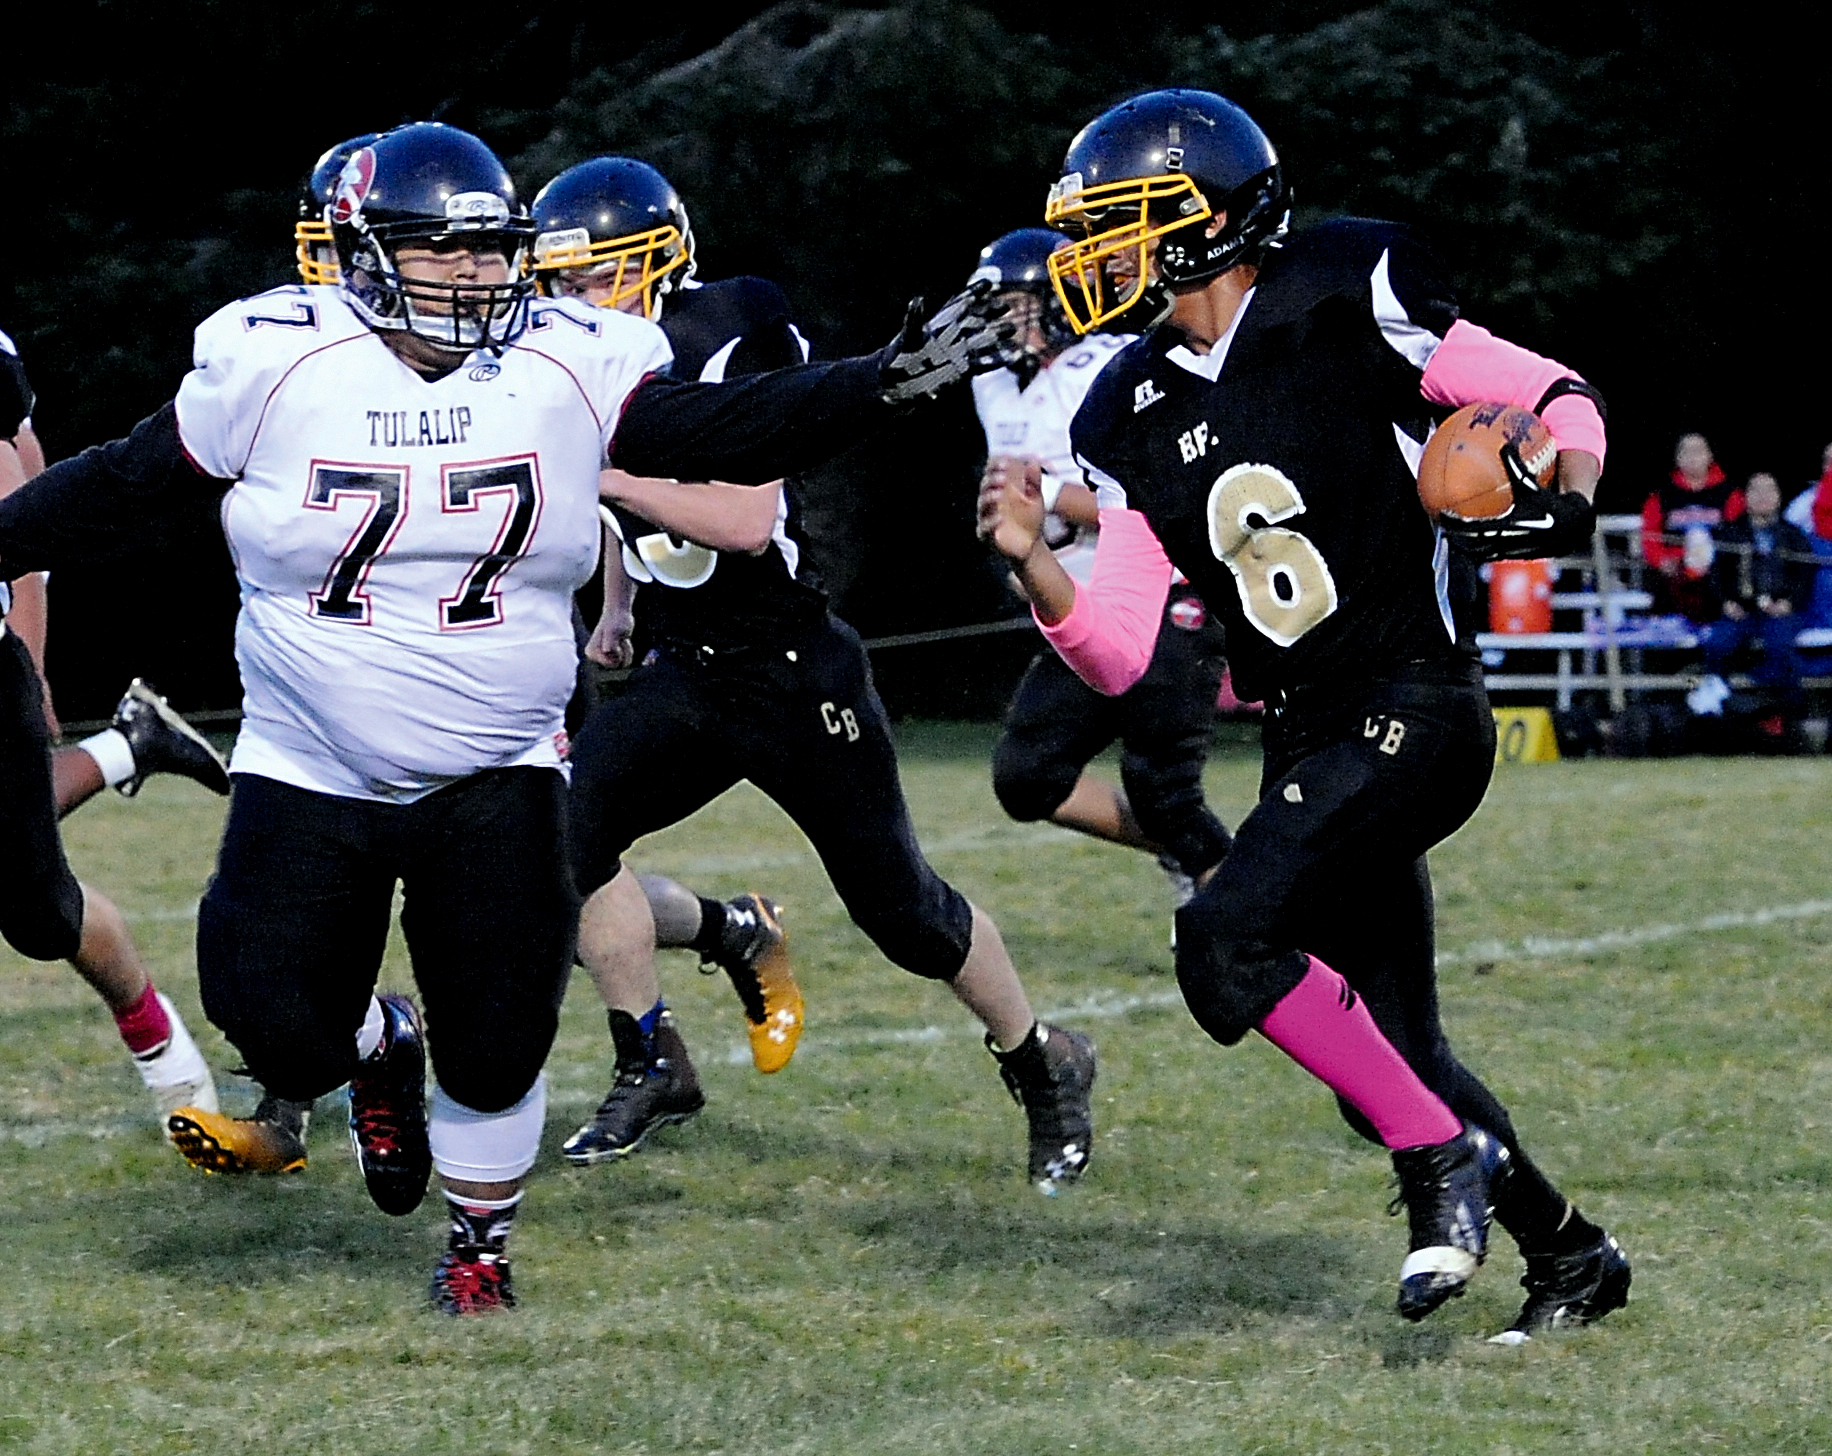 Clallam Bay's Alan Greene attempts to avoid Tulalip's Nate Williams (77) while returning an interception. Lonnie Archibald/for Peninsula Daily News